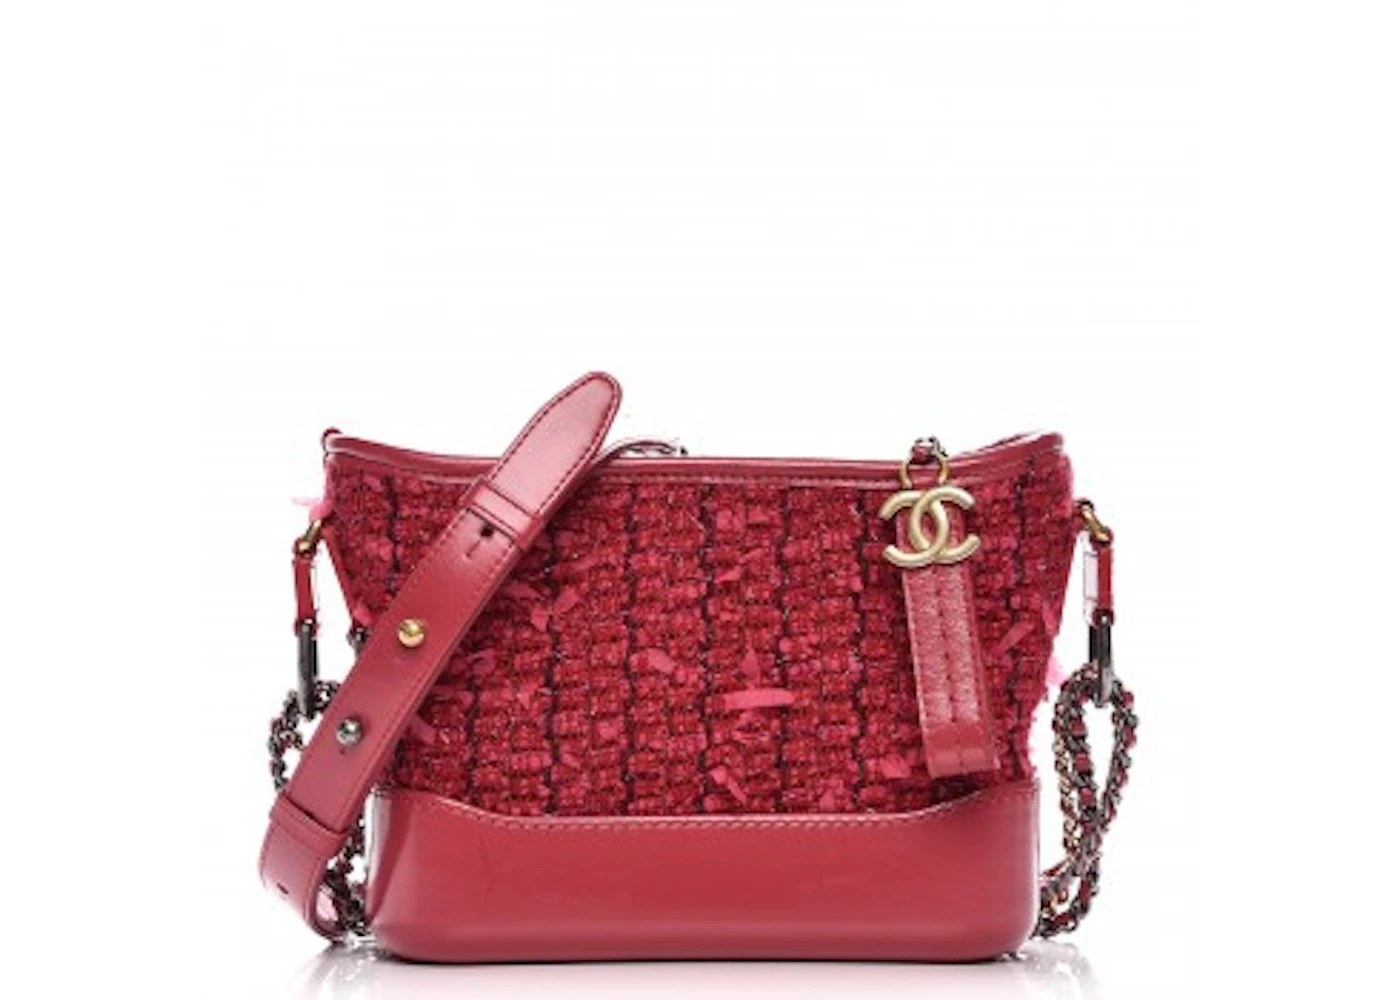 Chanel Gabrielle Hobo Bag Diamond Stitched Small Pink in Tweed ...